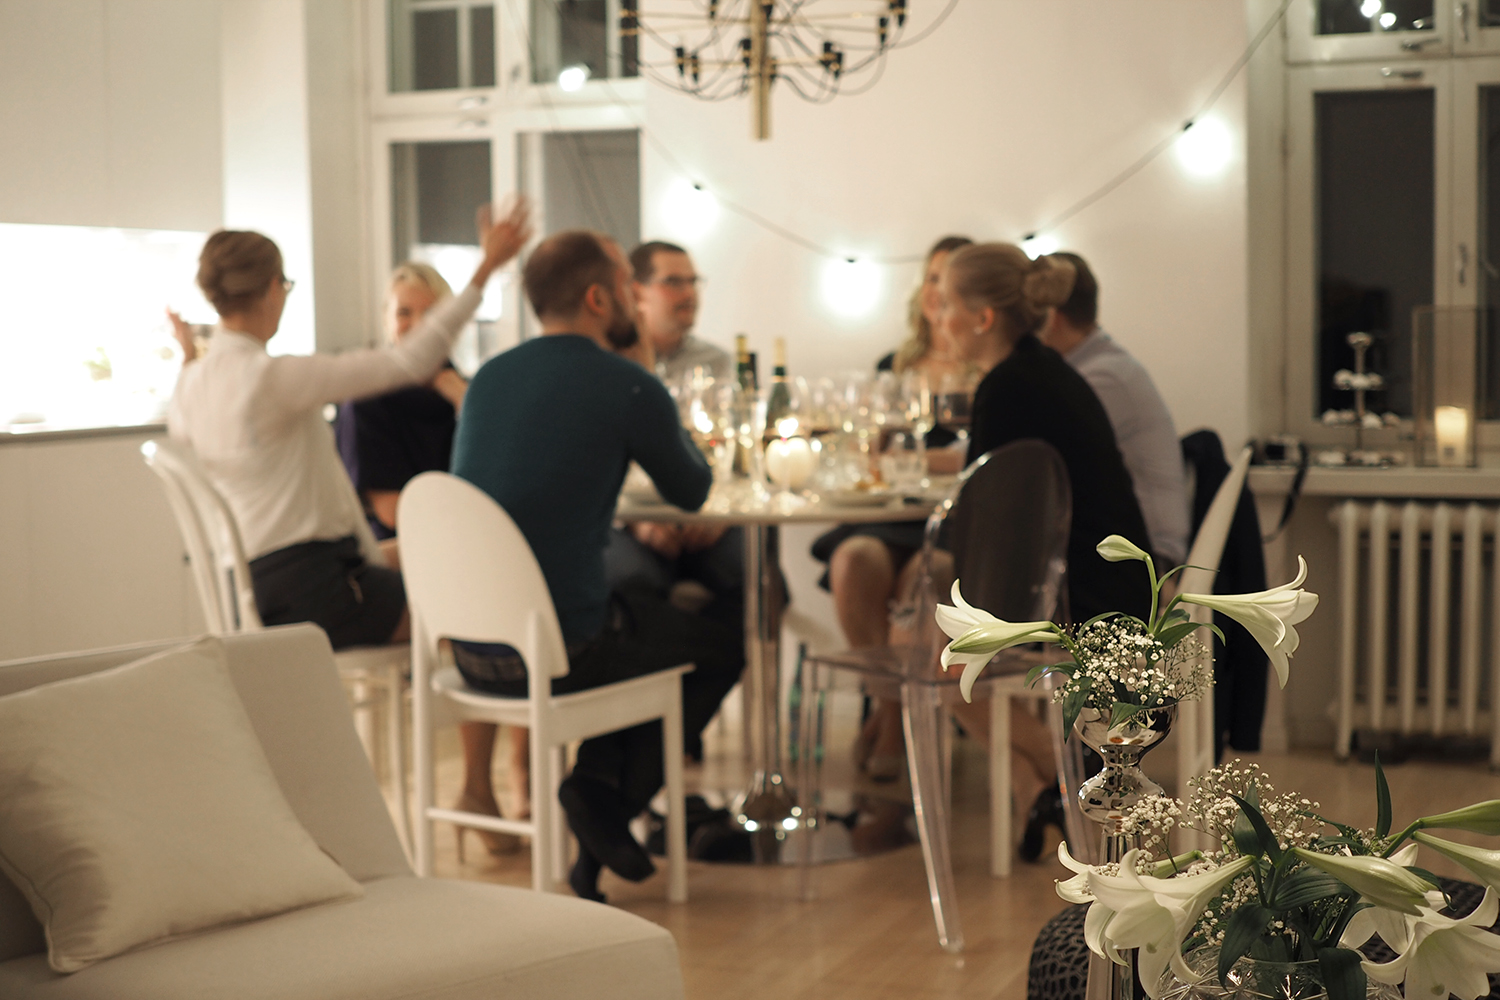 Char and the city - Ideas for a wine tasting - decoration, wines, wine glasses - read more on the blog: //www.idealista.fi/charandthecity/2016/09/27/viininmaistelu #winetasting #redwine #whitewine #sparklingwine #wineglasses #tablesetting #kitchen #party